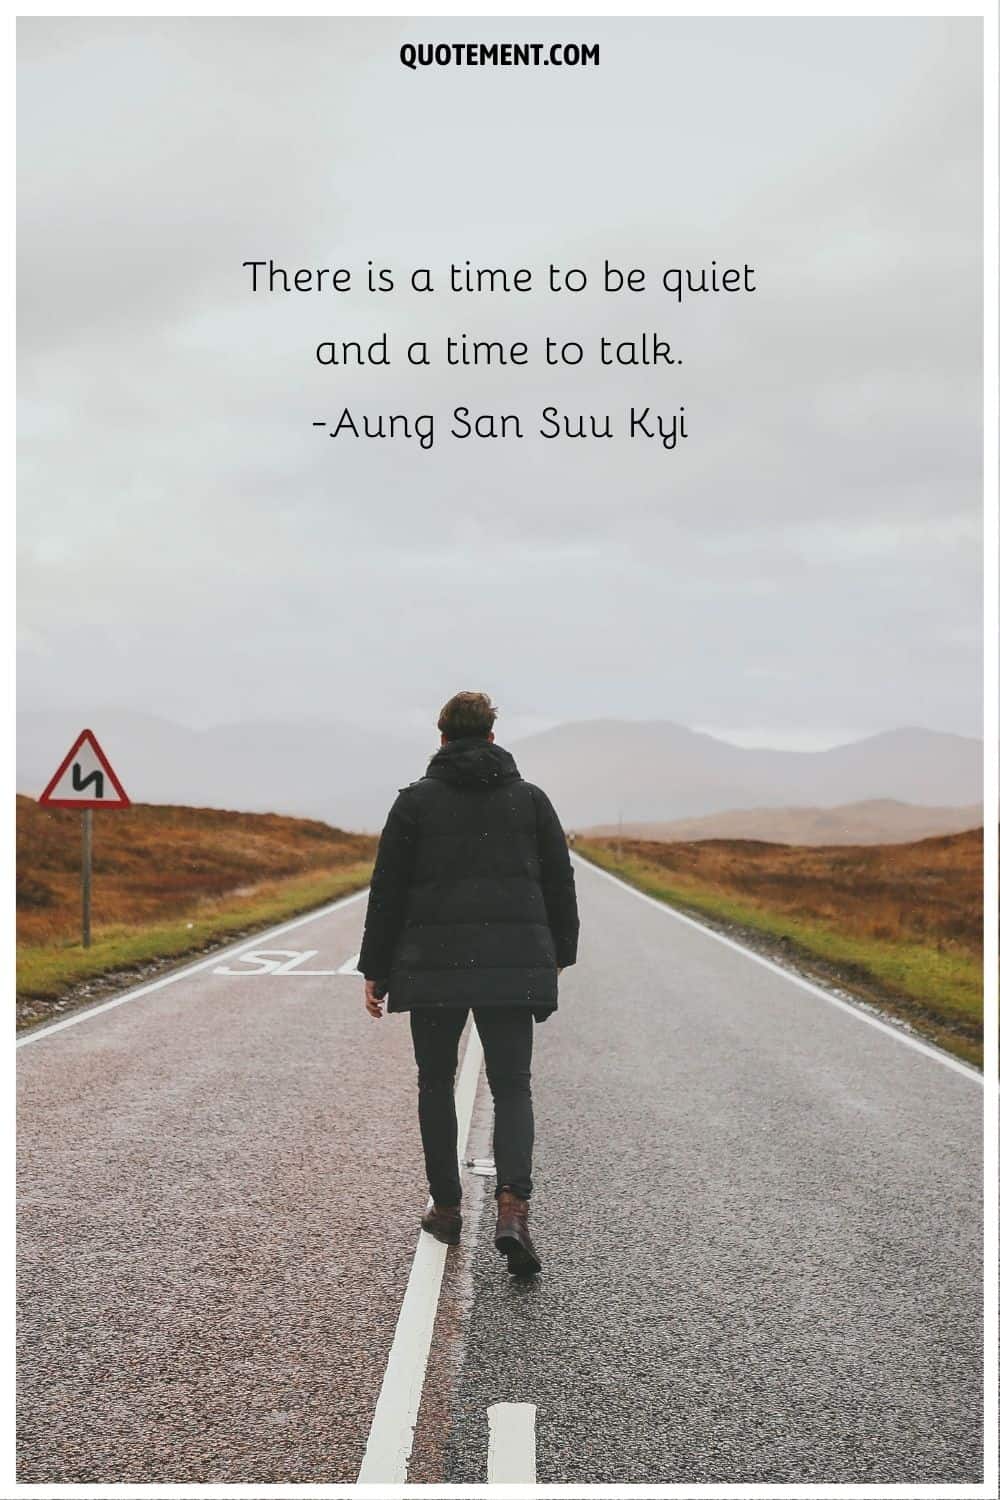 “There is a time to be quiet and a time to talk.” – Aung San Suu Kyi